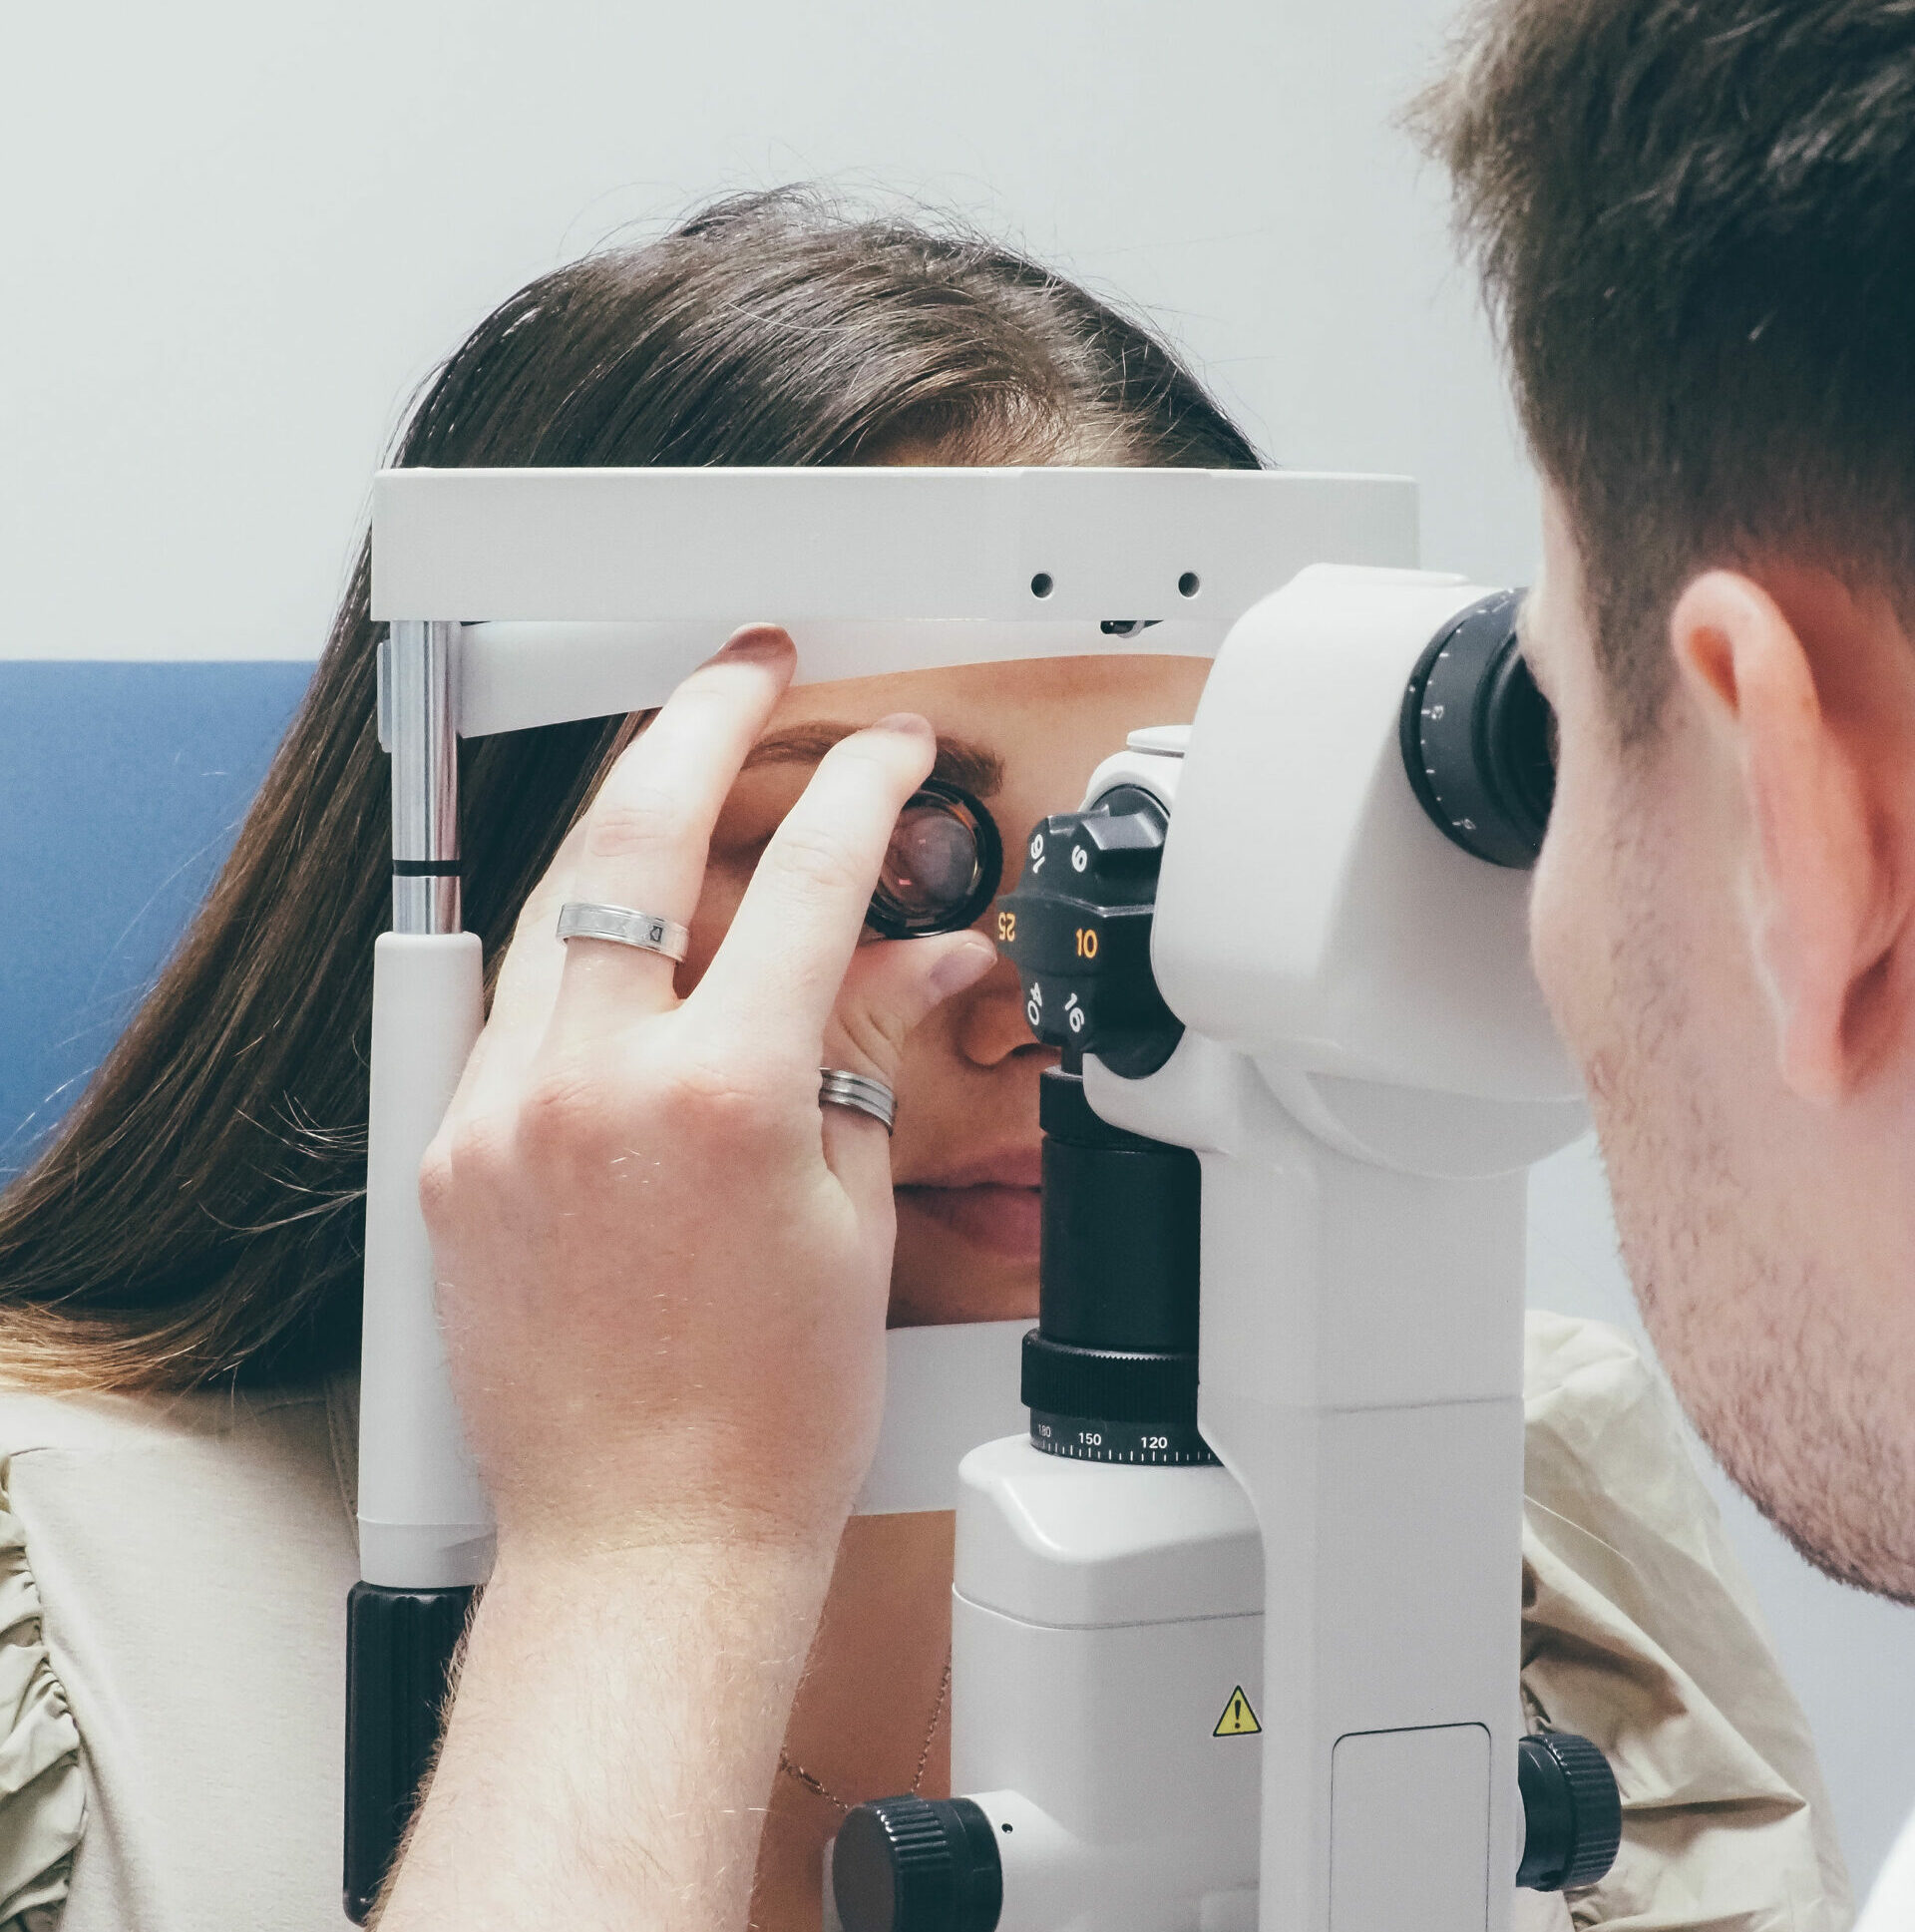 How eye tests can spot diabetes